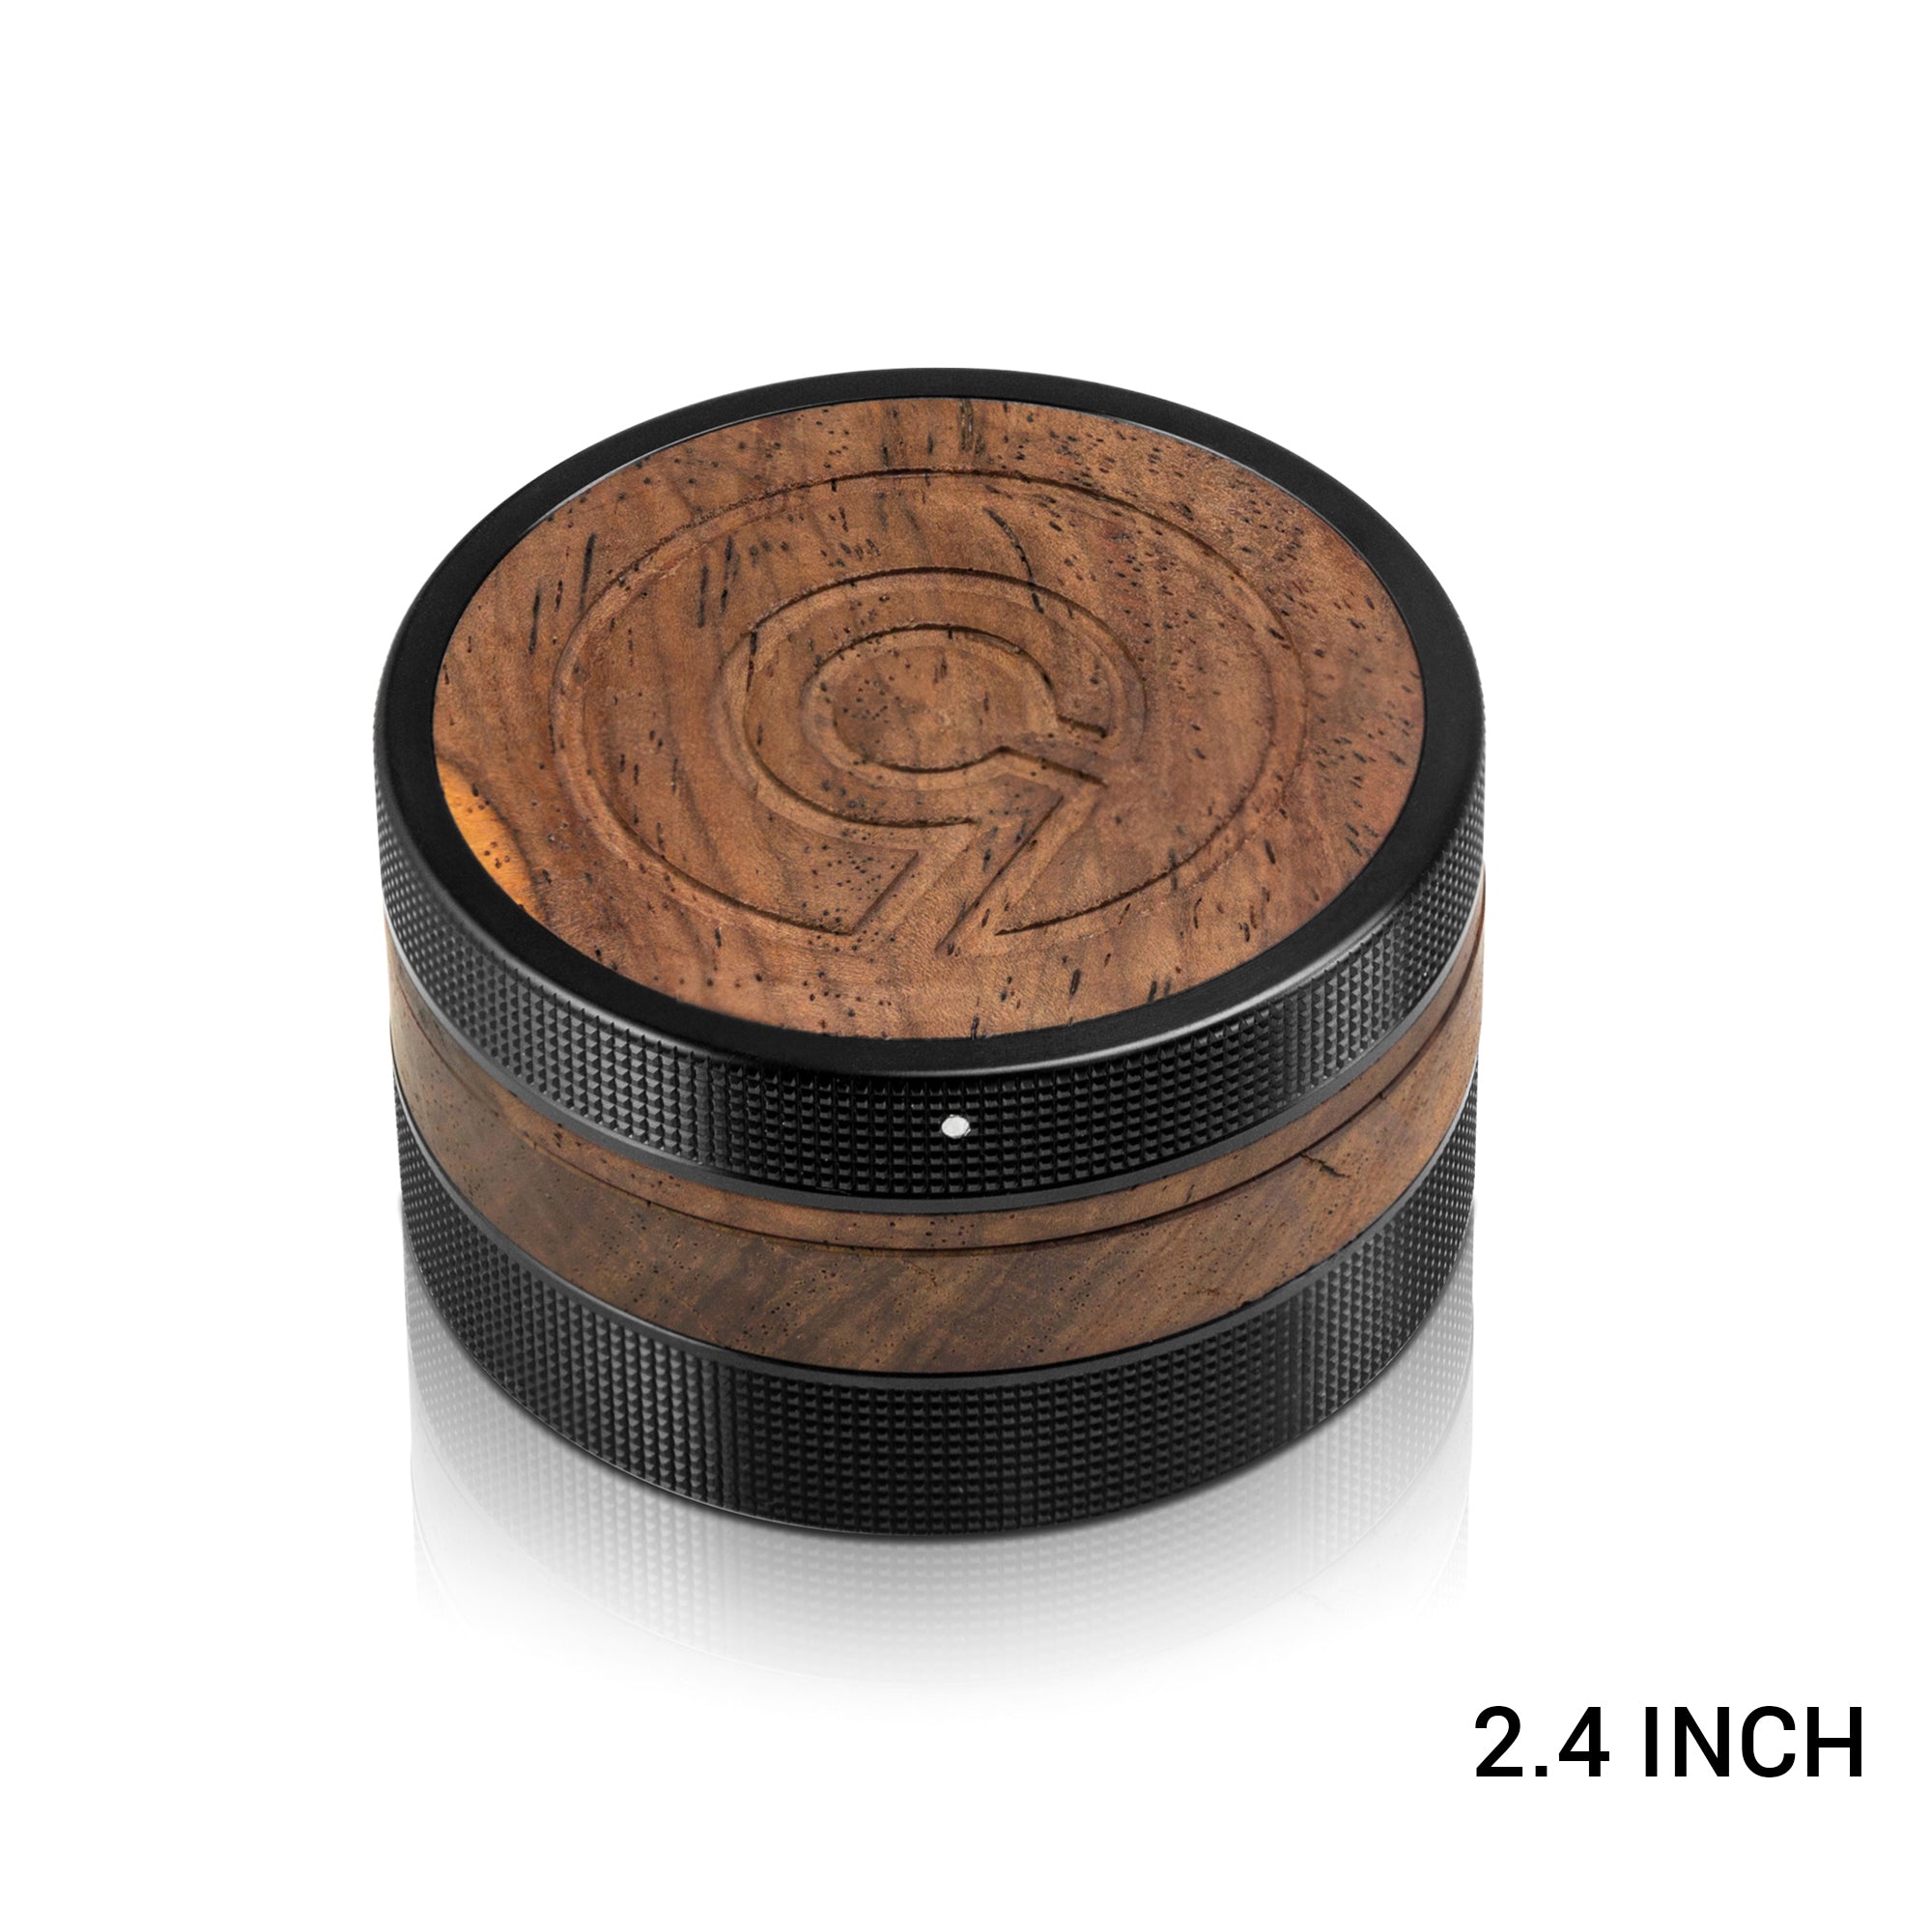 SEQUOIA9 All Natural Wood to Herb Grinder